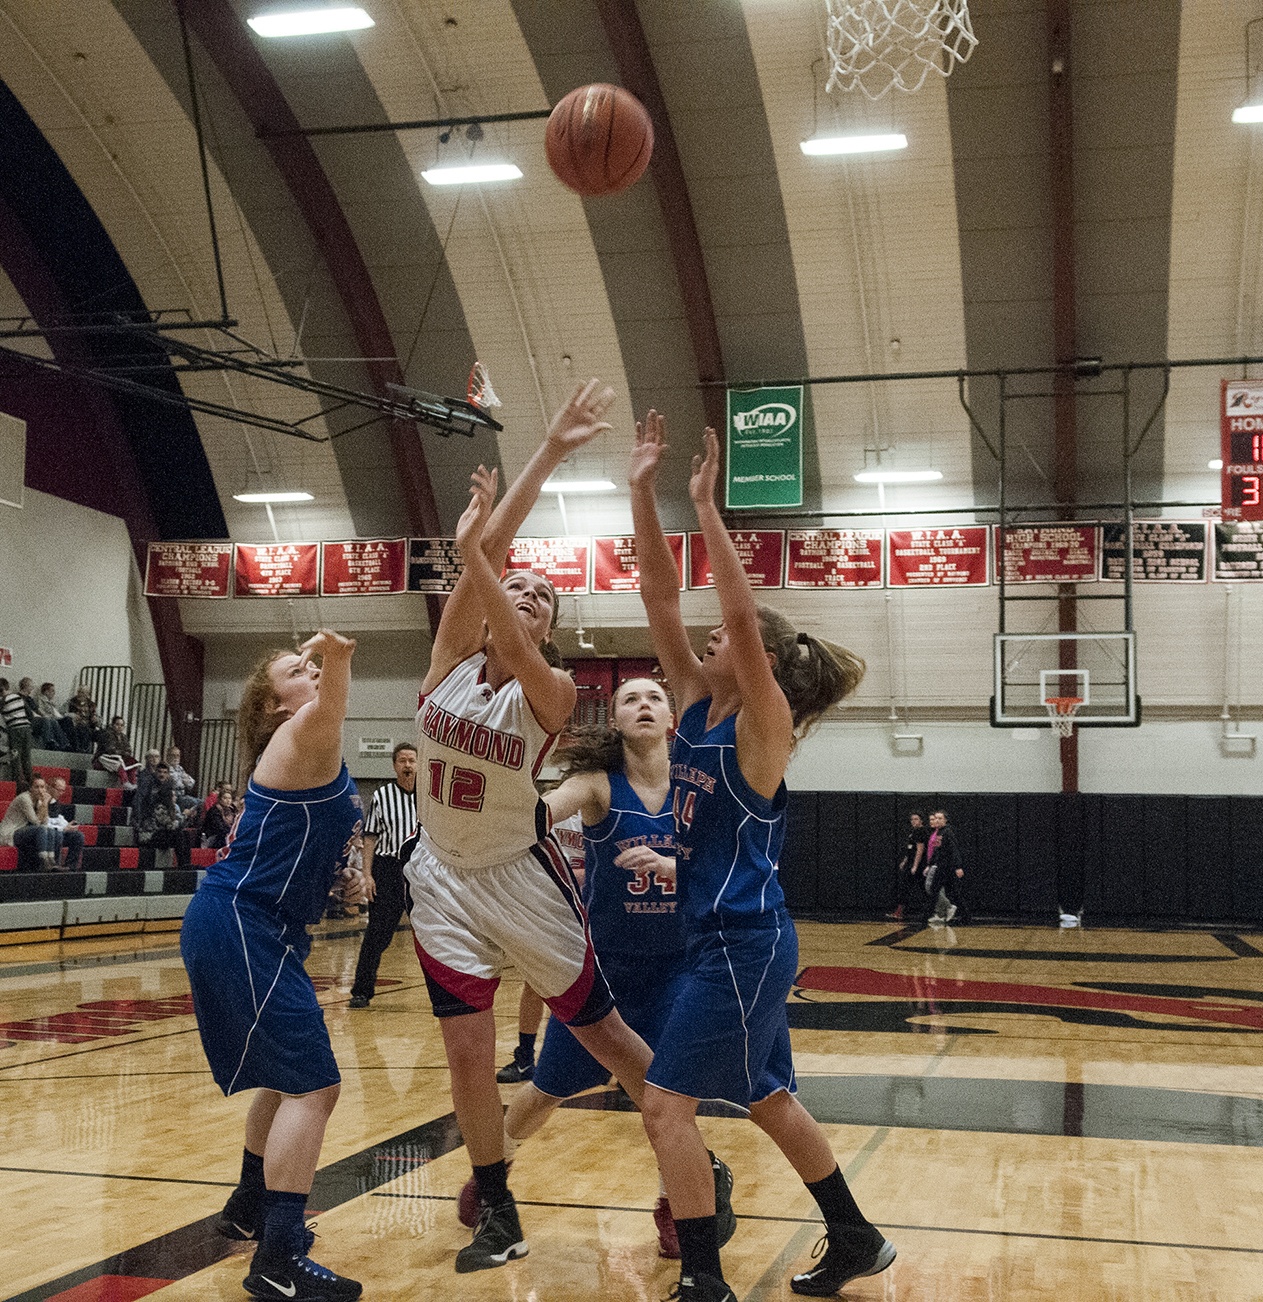 (Brendan Carl | The Daily World) Raymond’s Mikayla Collins puts up a shot in between two Willapa Valley defenders during a Pacific 2B League game in December. The Gulls will take on Ilwaco in a regional seeding game Saturday at Chehalis.